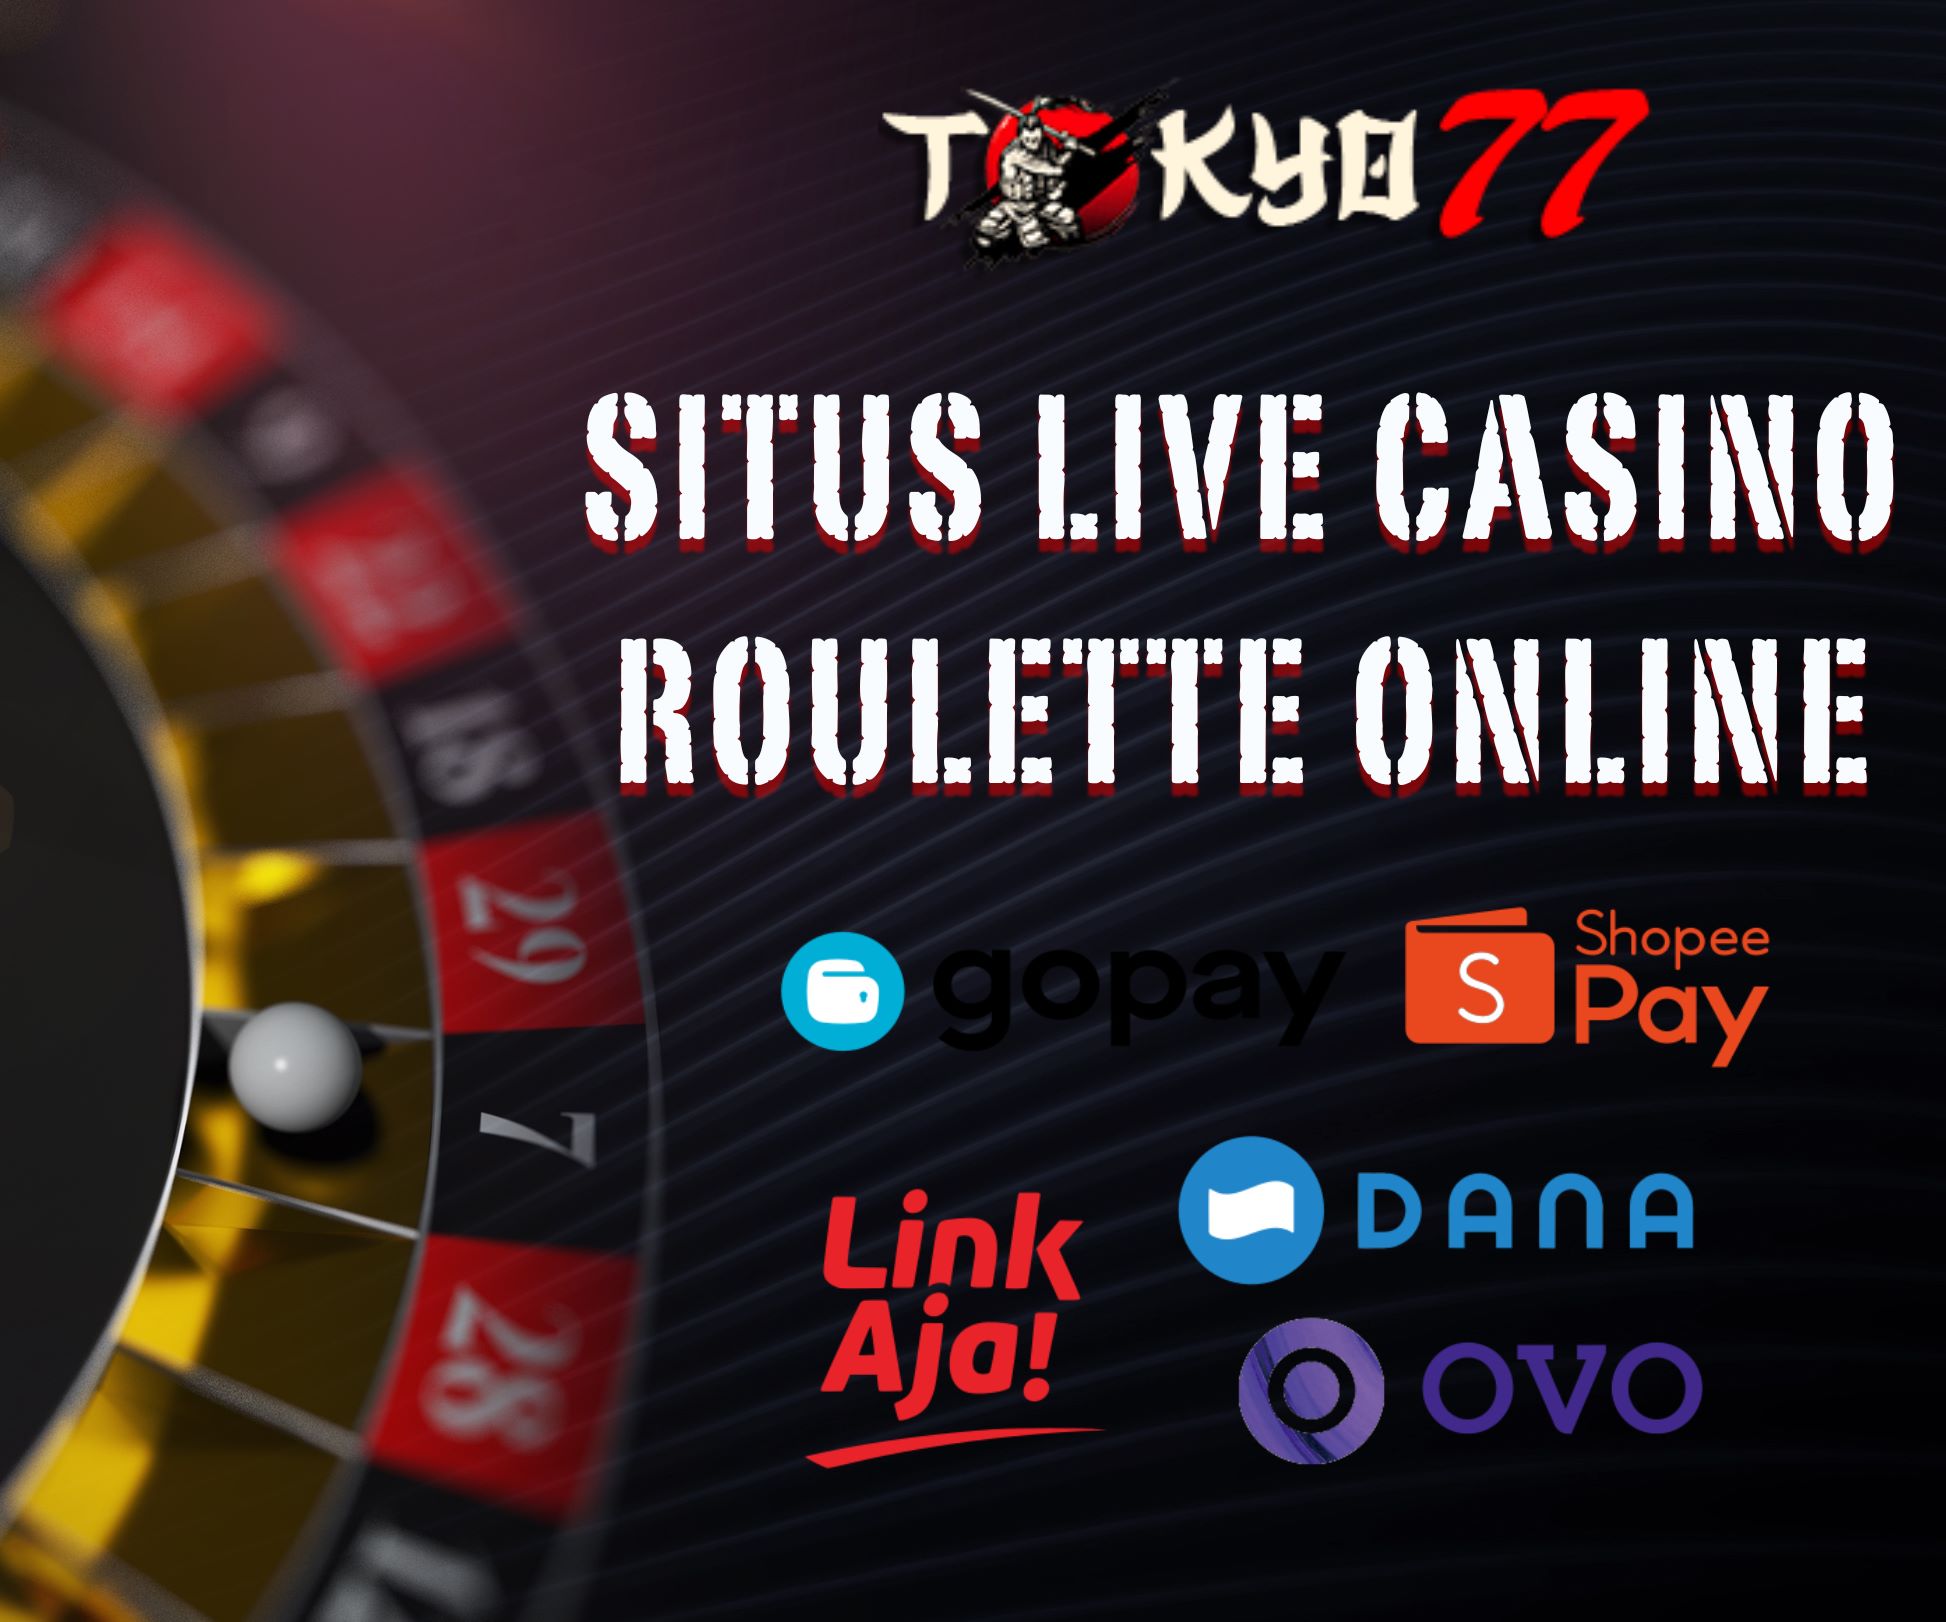 Complete the Biggest Tricks in Live Casino Roulette Online